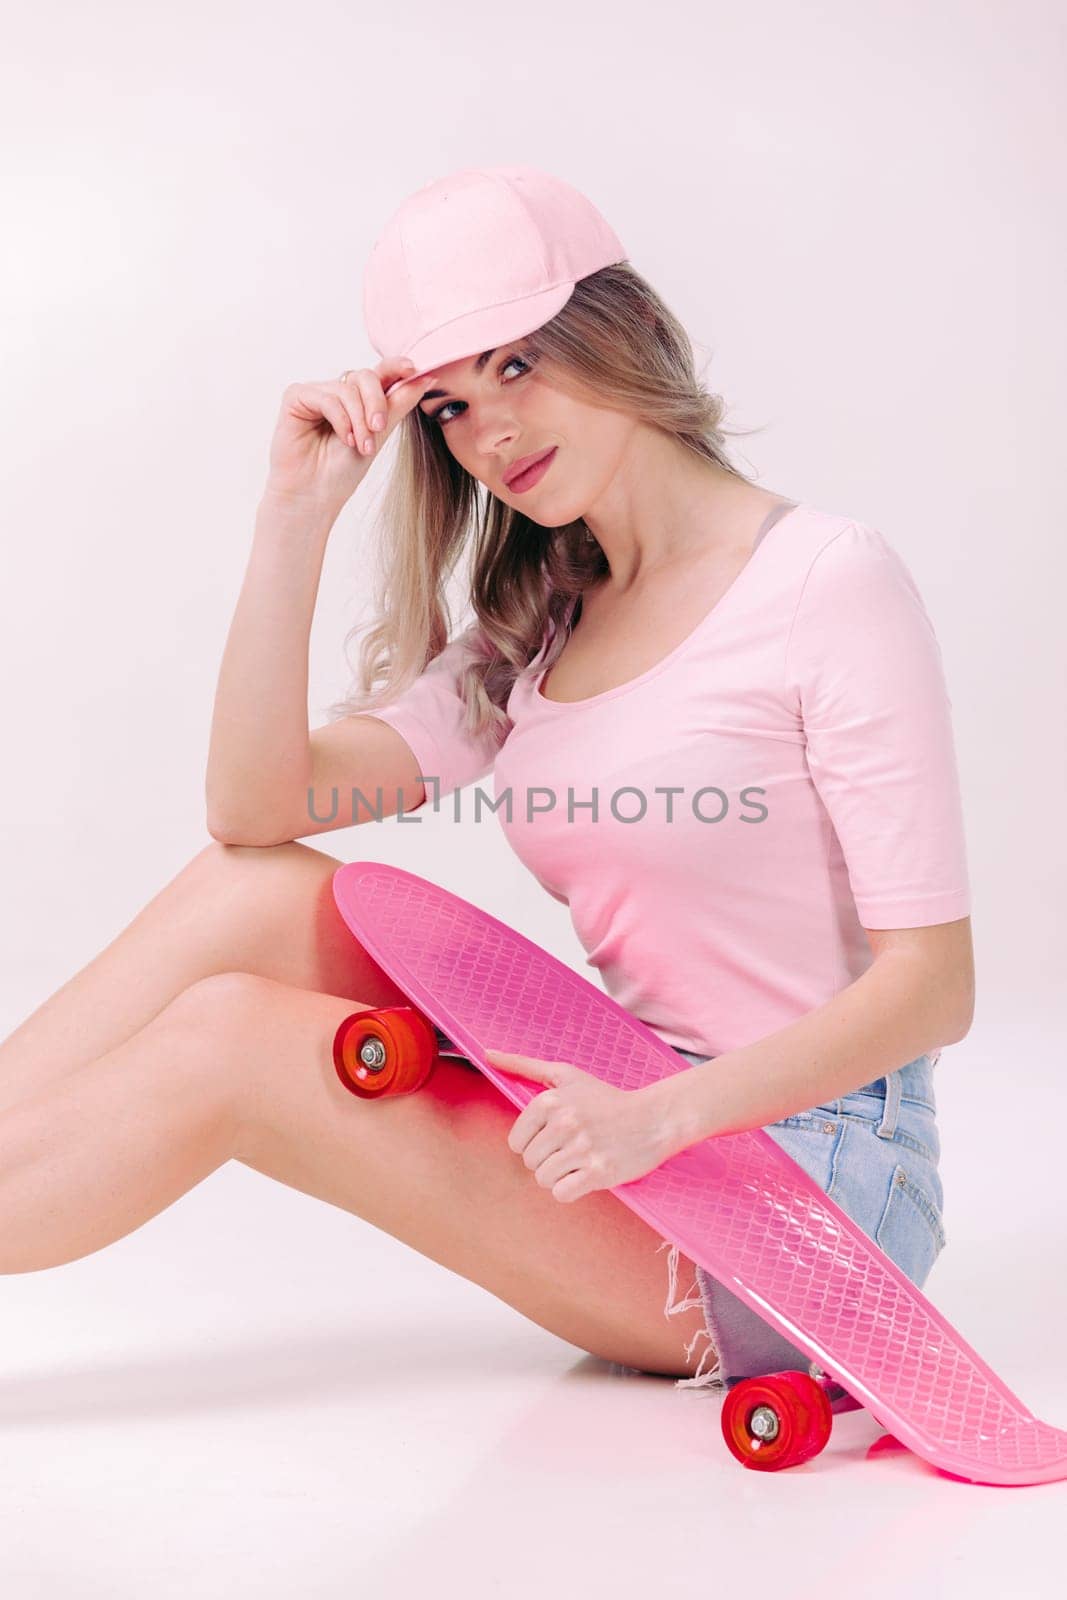 beautiful woman in white t-shirt with pink skateboard by erstudio